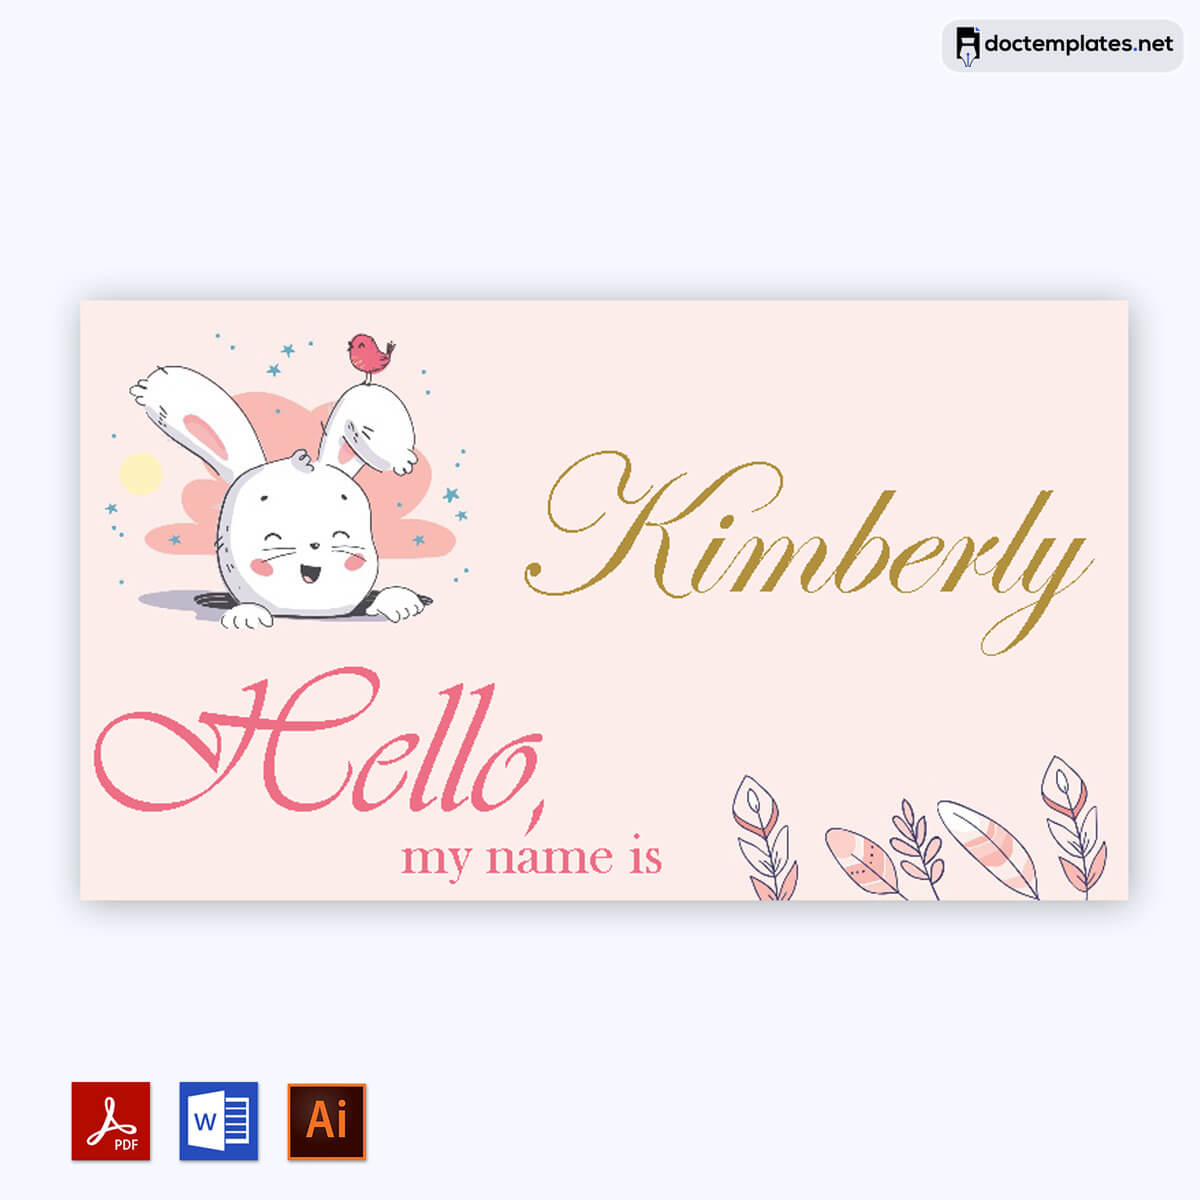 Image of School name tag template free download
School name tag template free download
 01